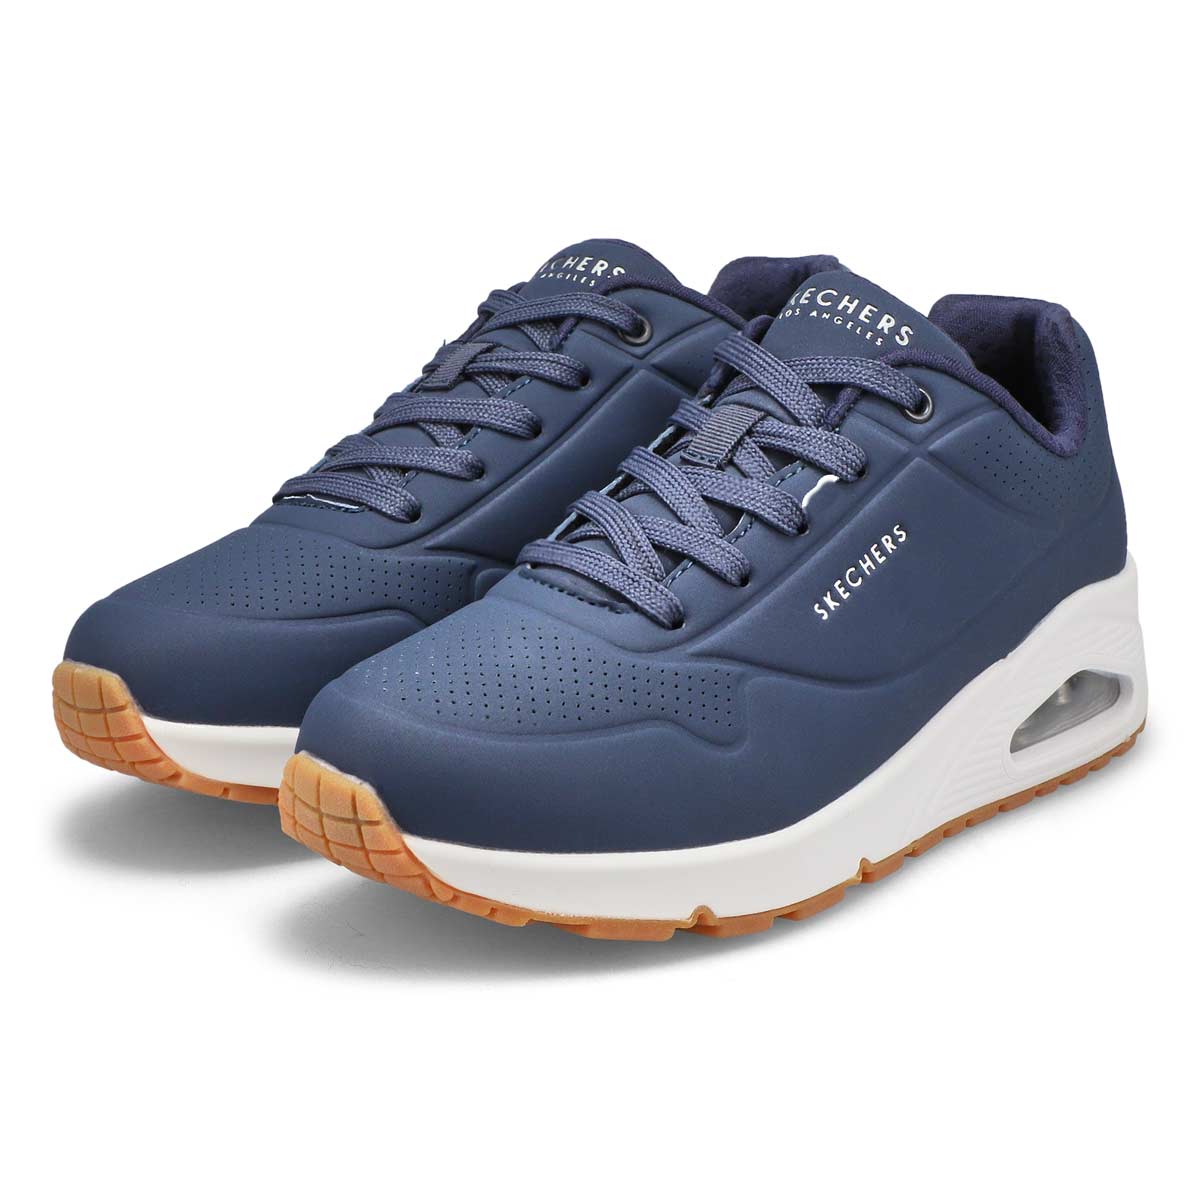 Women's Uno Stand On Air Sneaker - Navy